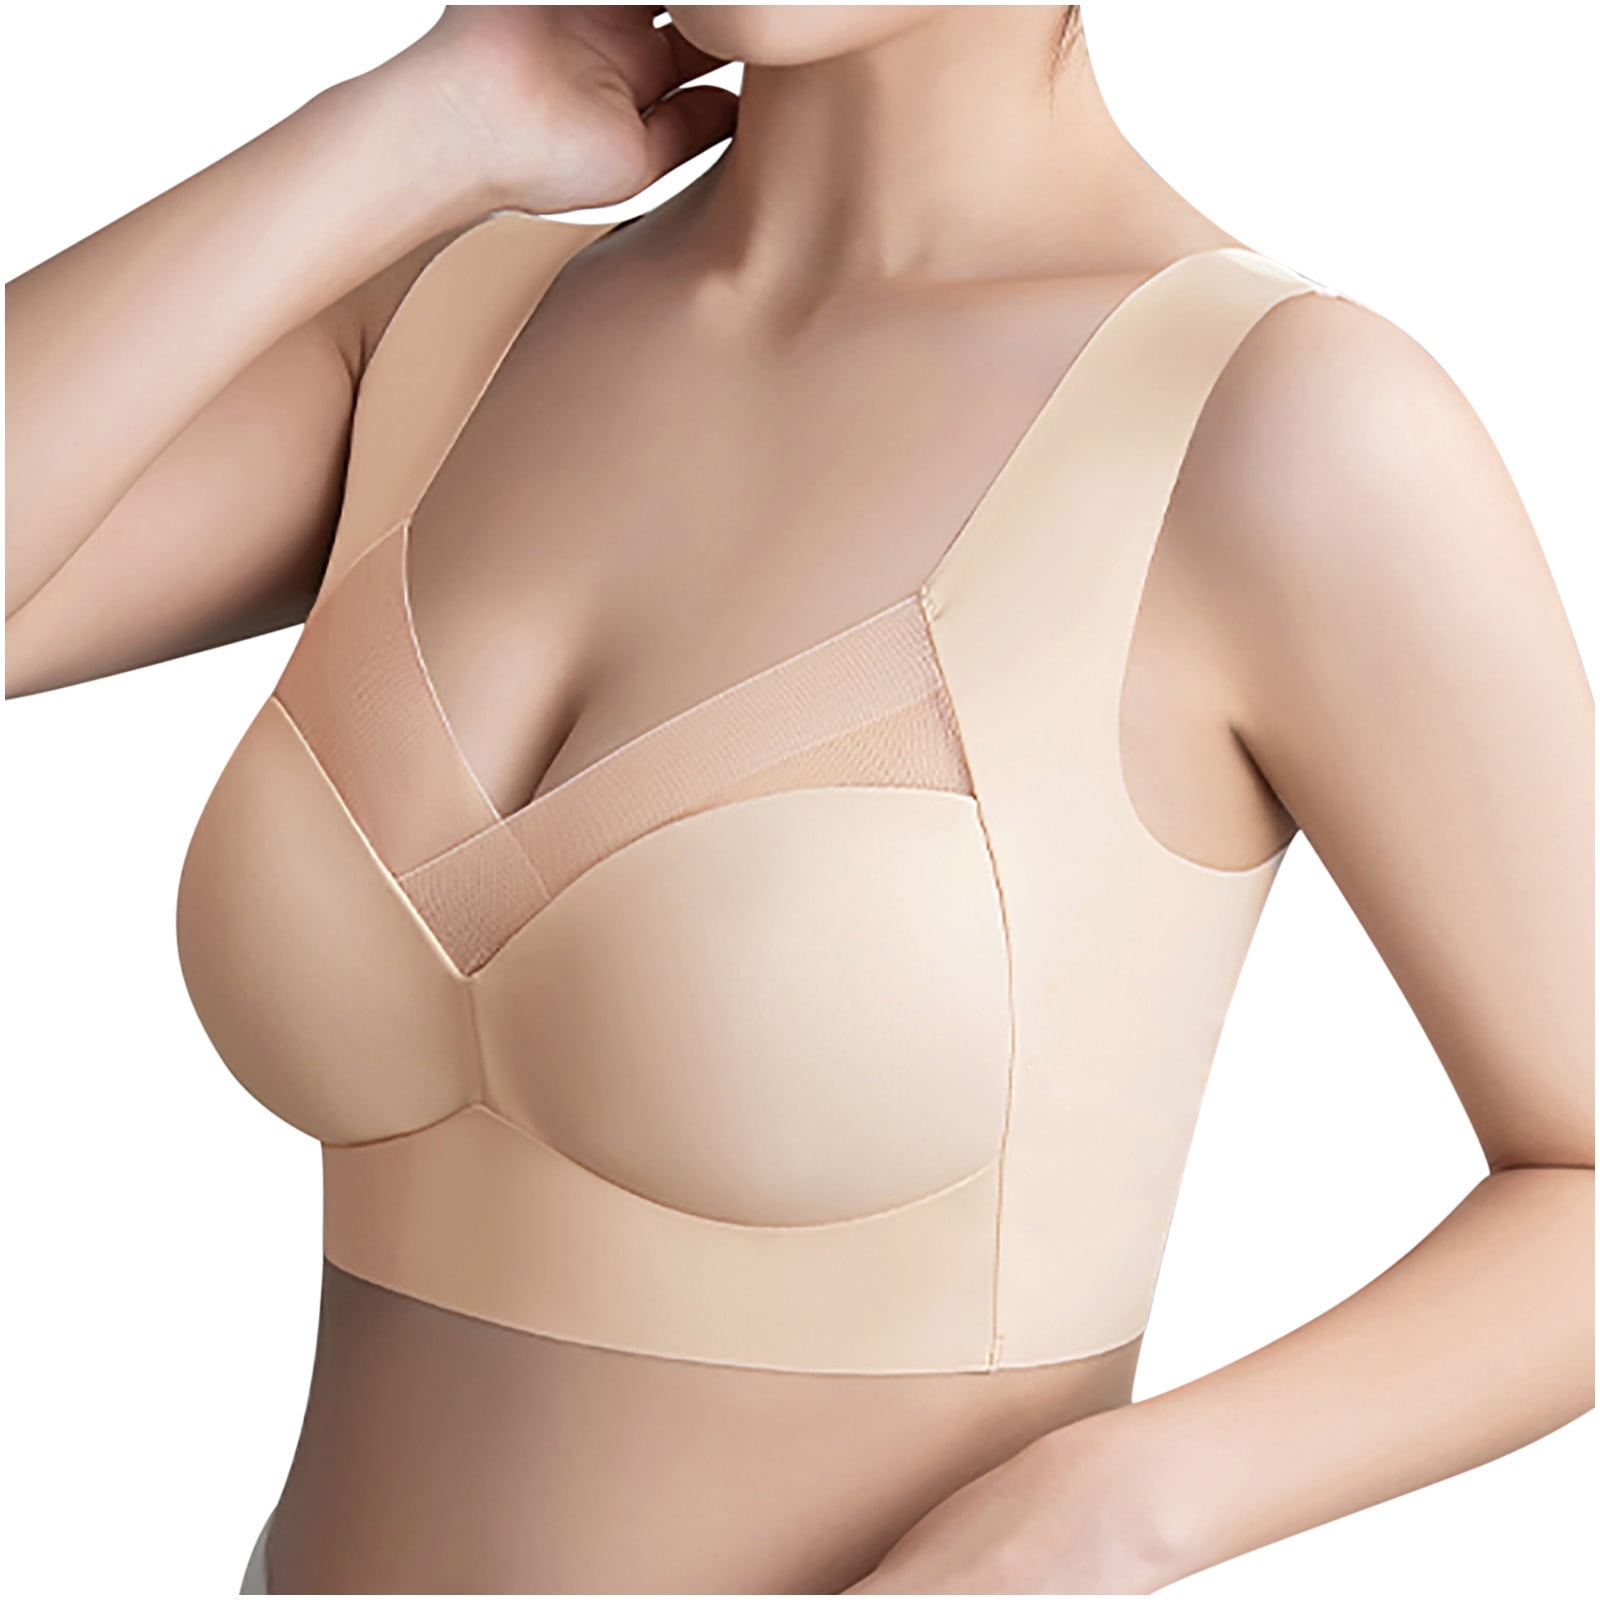  Womens Bras Comfortable Wide Band Support No Underwire Bras  Comfortable Wire Womens Bras No Underwire Front (Beige, 36) : Sports &  Outdoors